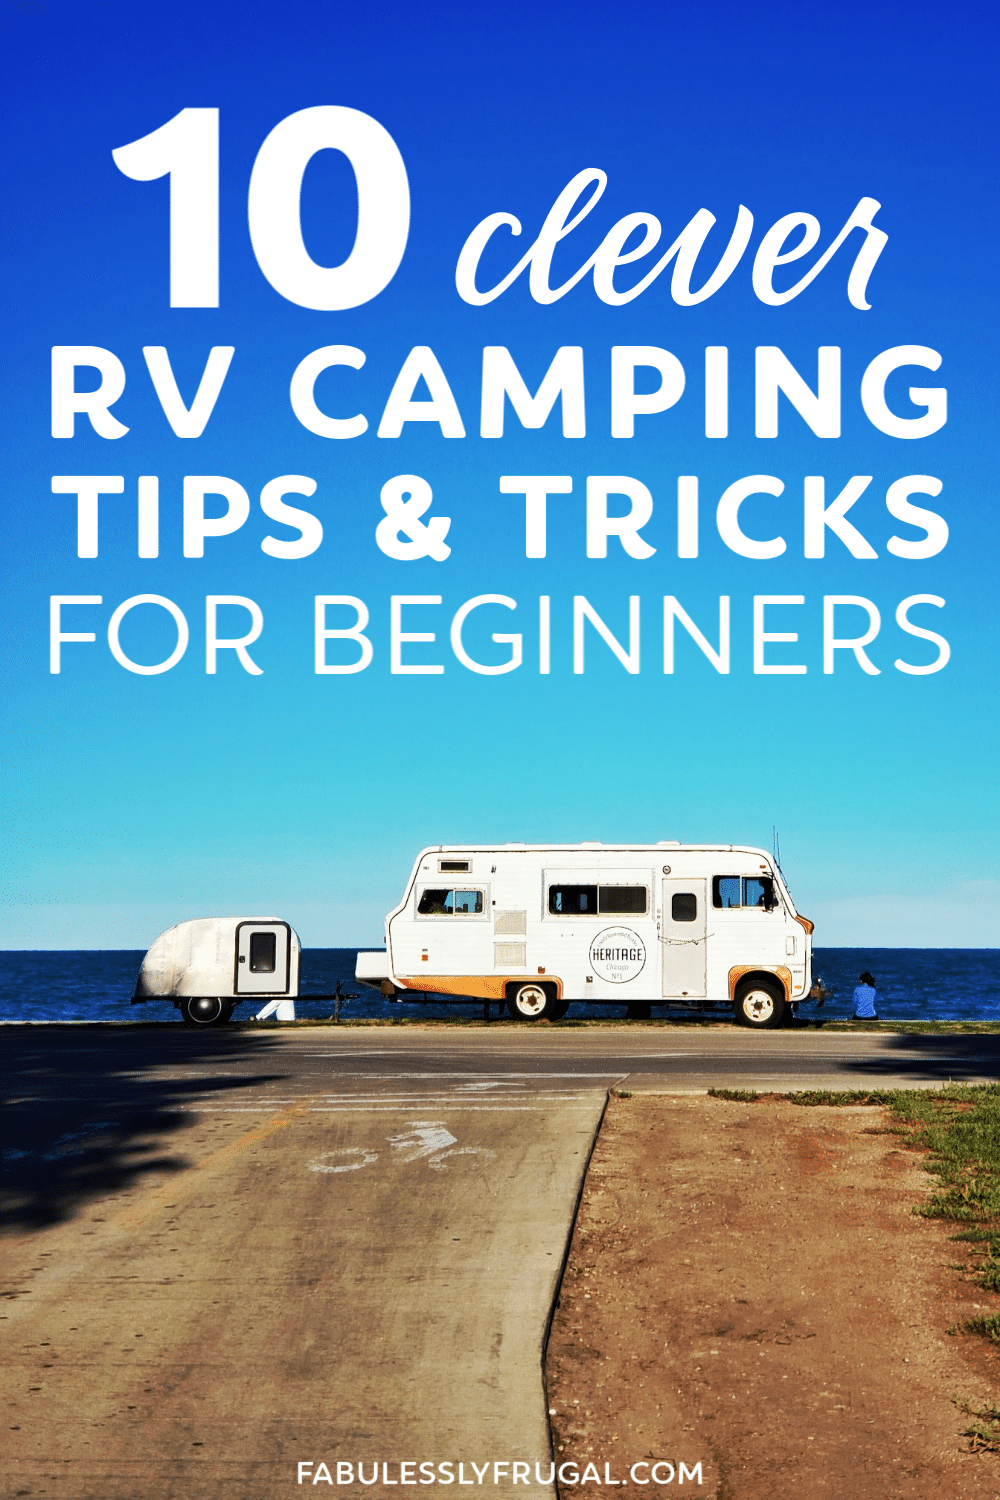 TV camping tips for beginners